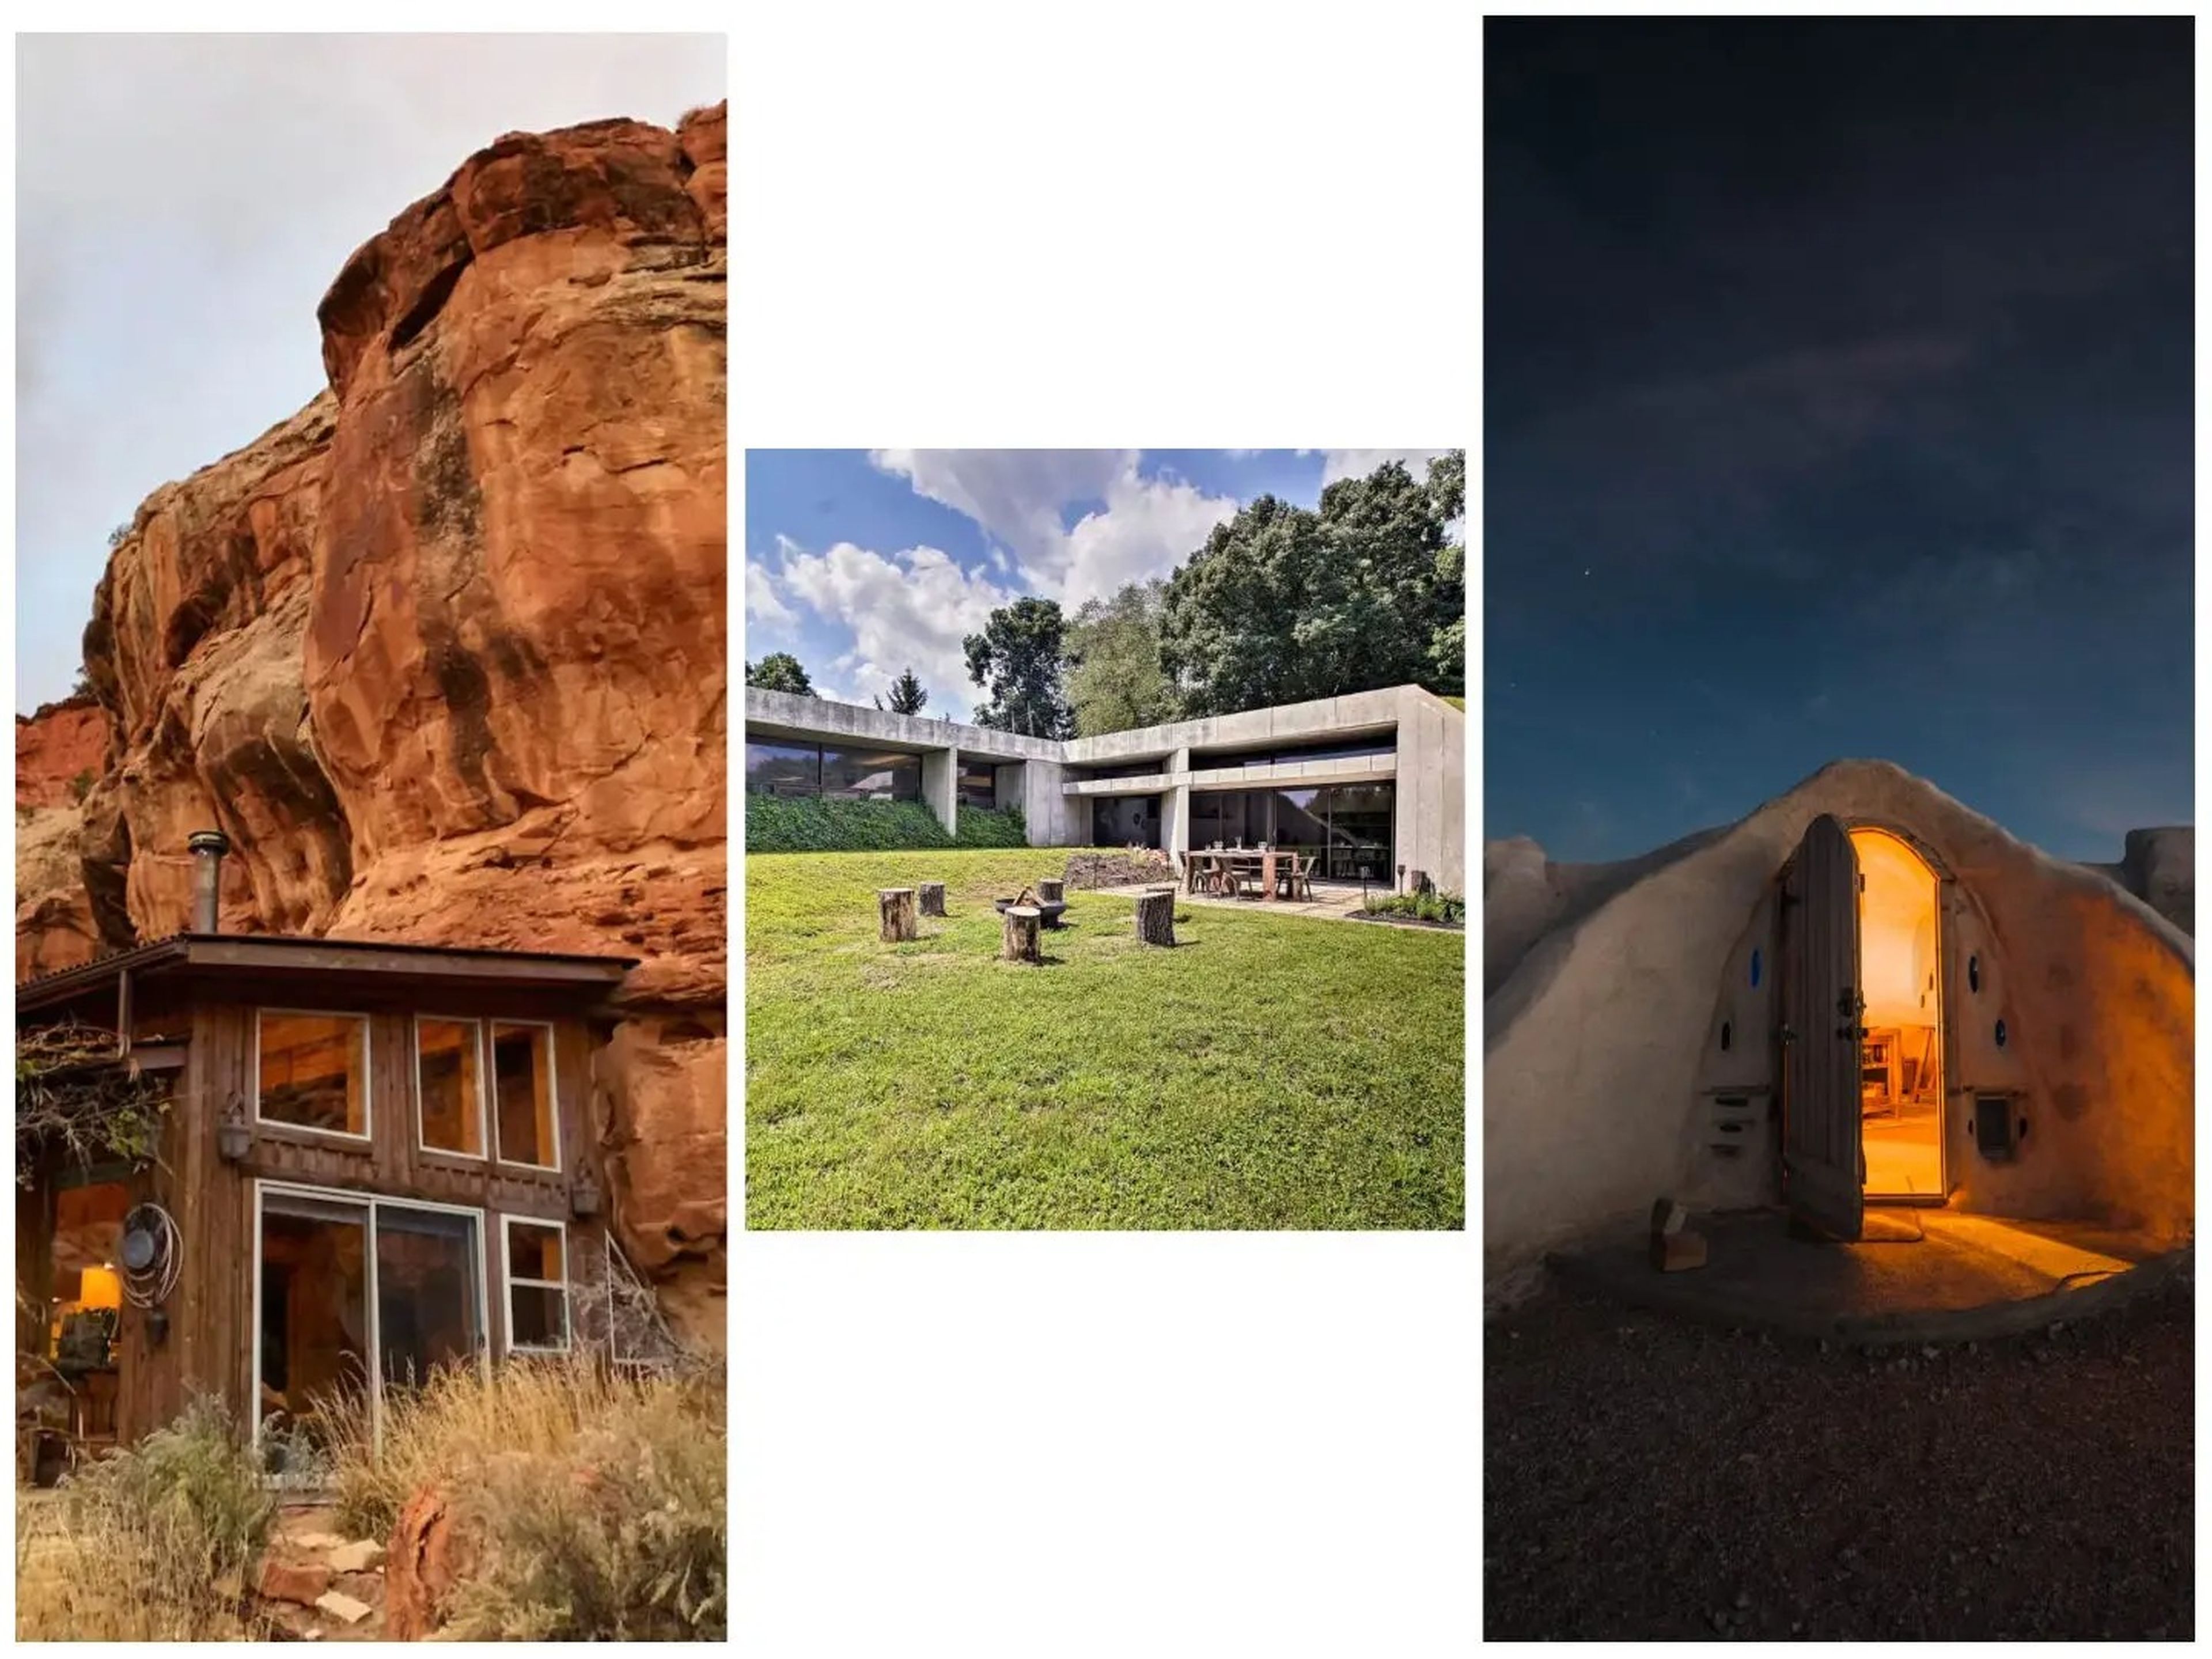 A collage showing a troglodyte home, the "earthouse" and the off-grid dome.